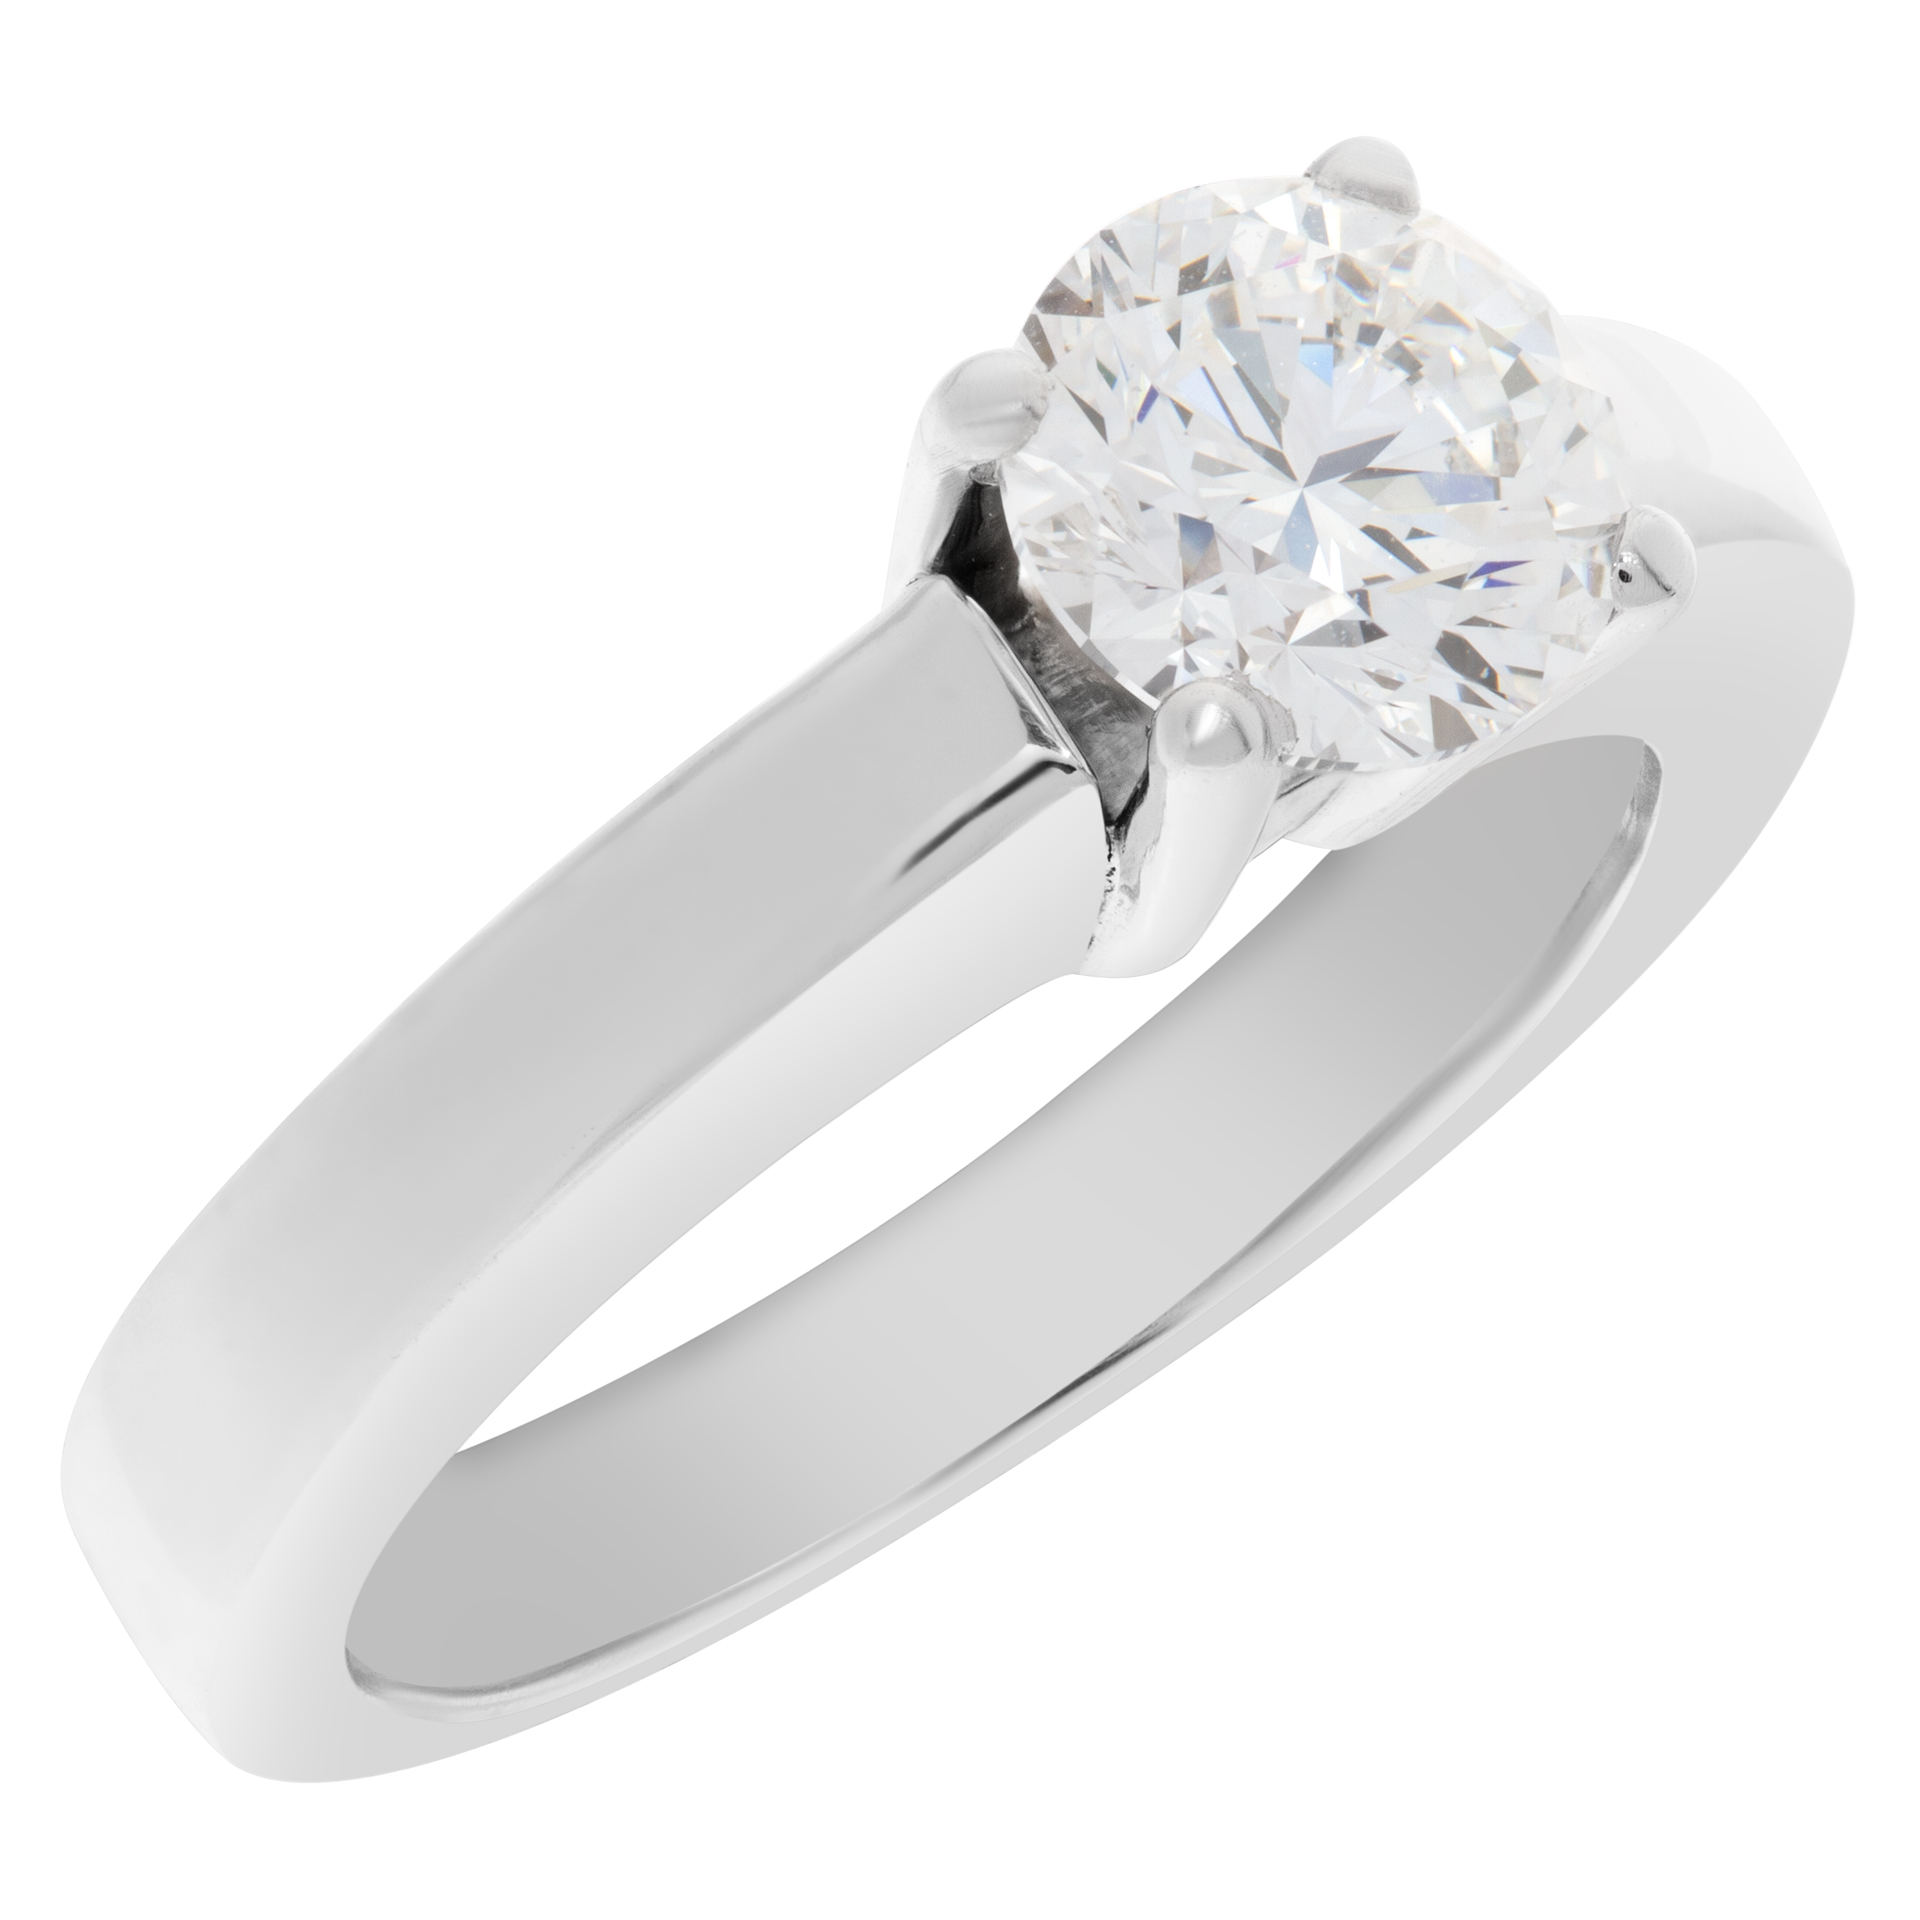 GIA Certified Diamond 1 ct (E color, VVS2 clarity) ring set in platinum. Size 5.25 image 3